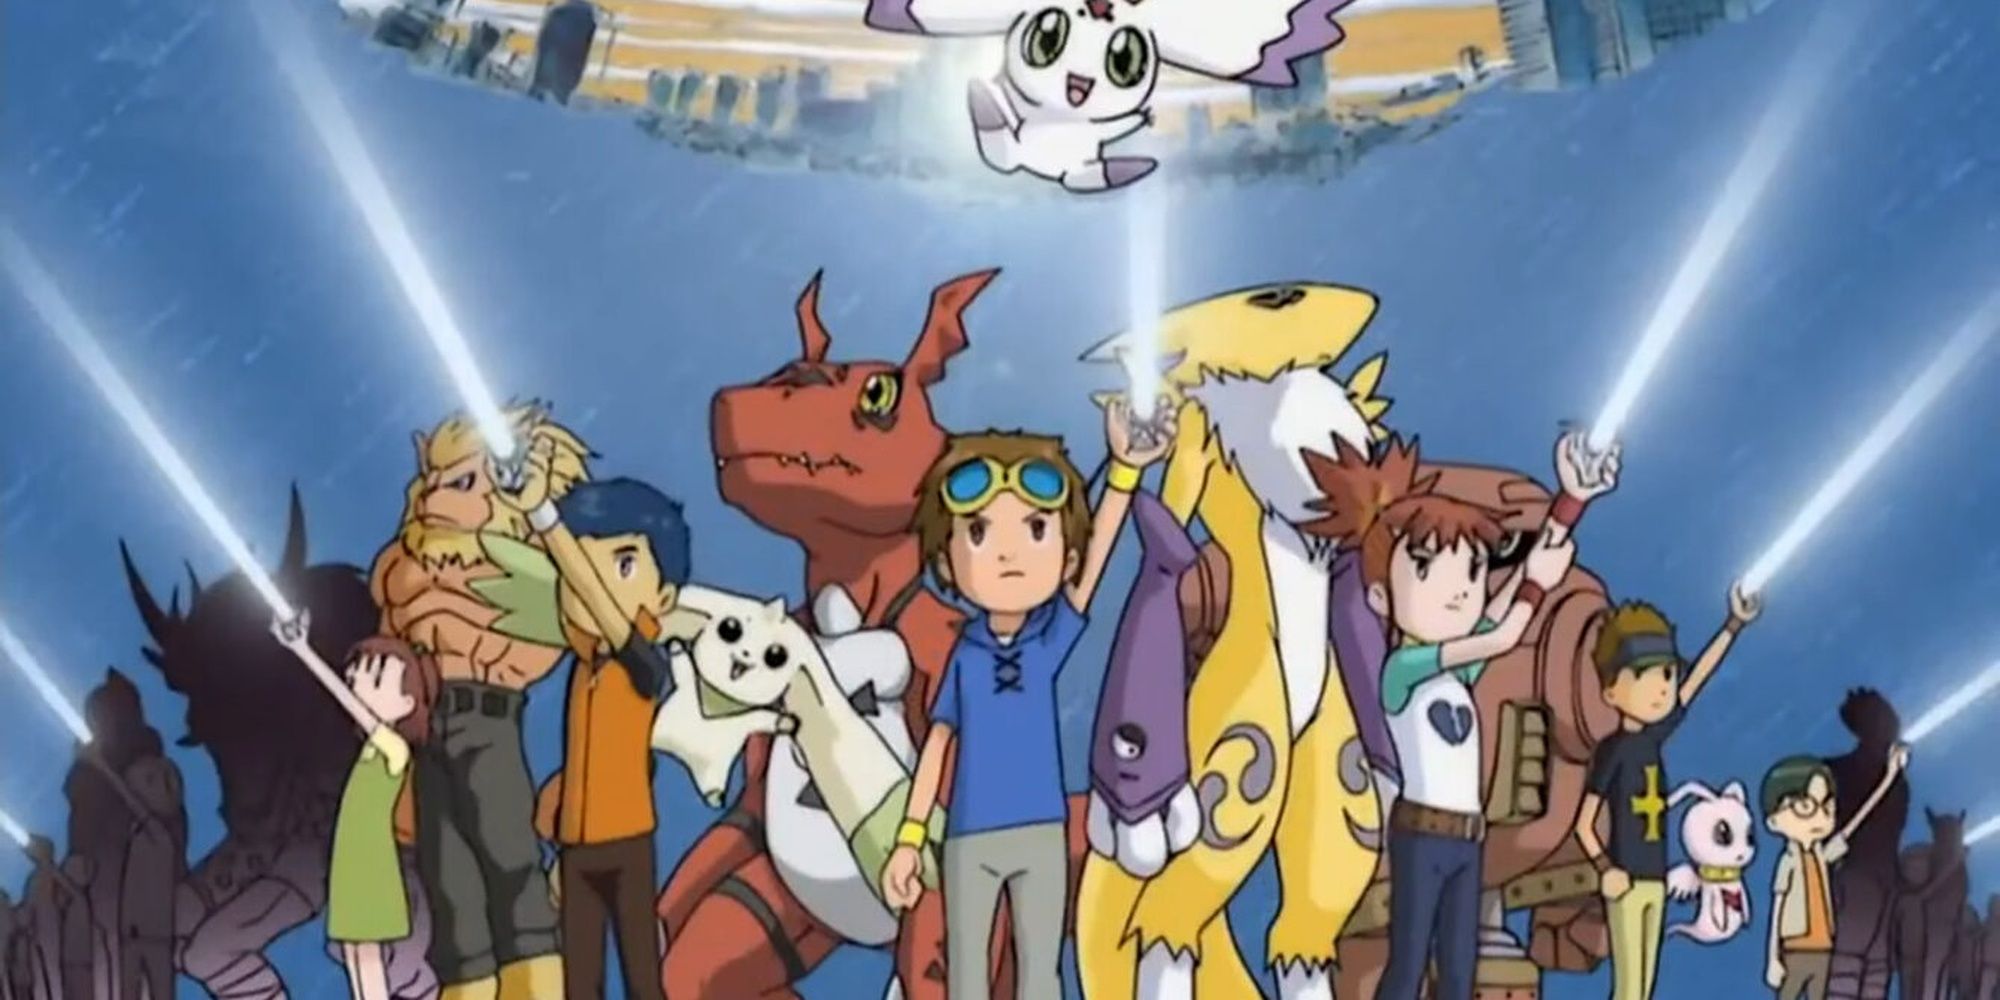 The cast of Digimon Tamers